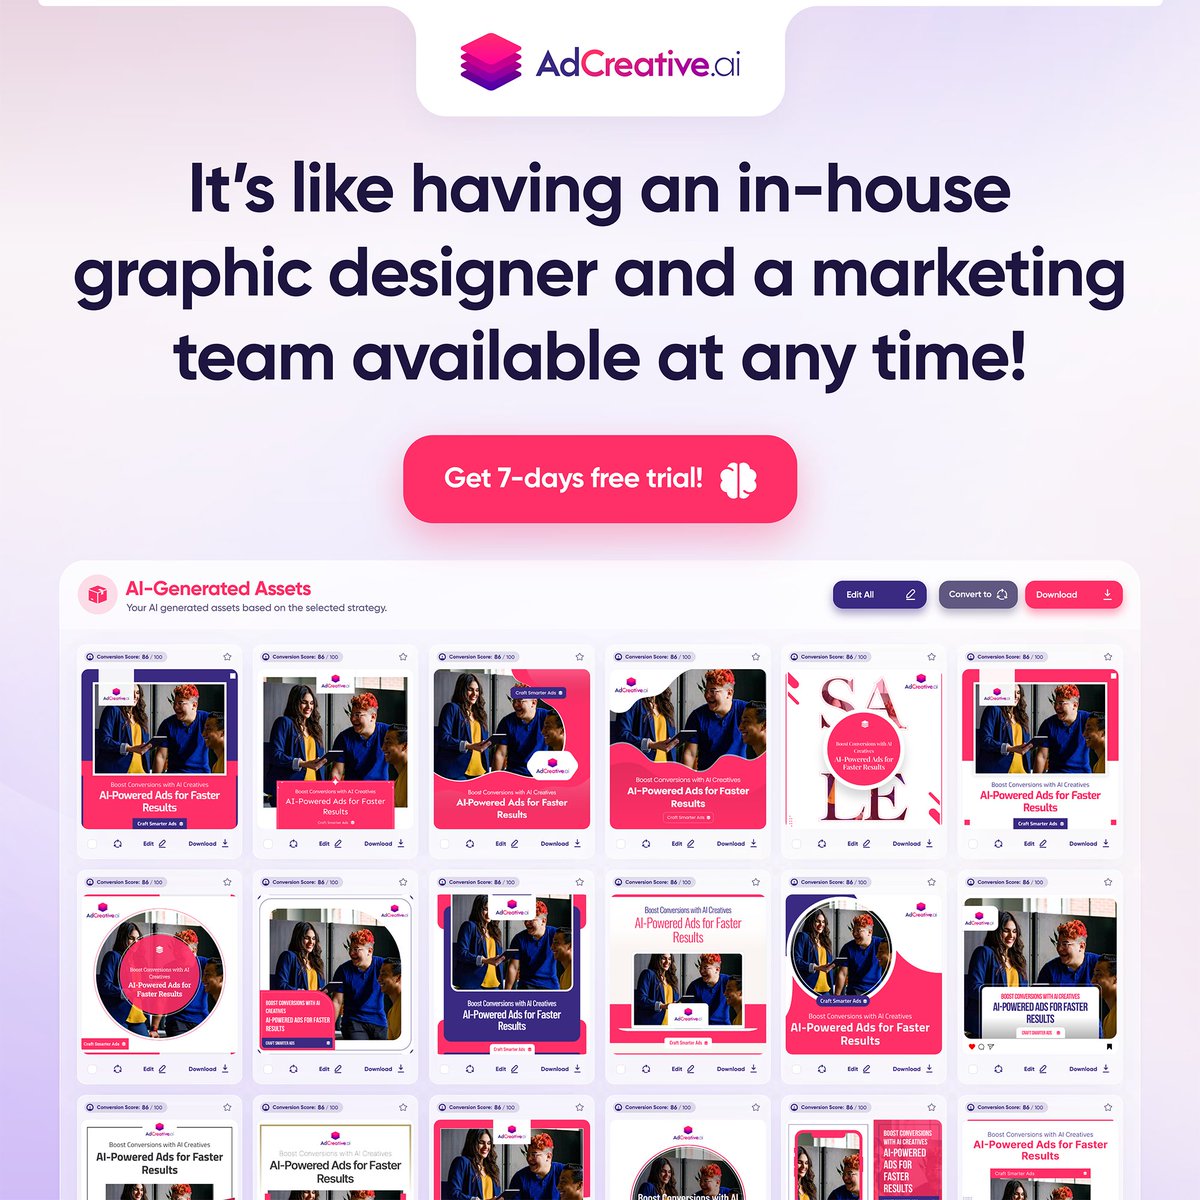 Are you tired of creating ads and social media content that aren't performing well? Try AdCreative AI: bit.ly/DCM-AdCai

It can help with its AI-powered banner automation software makes it easy to create high-performing ads and social media content in just minutes.